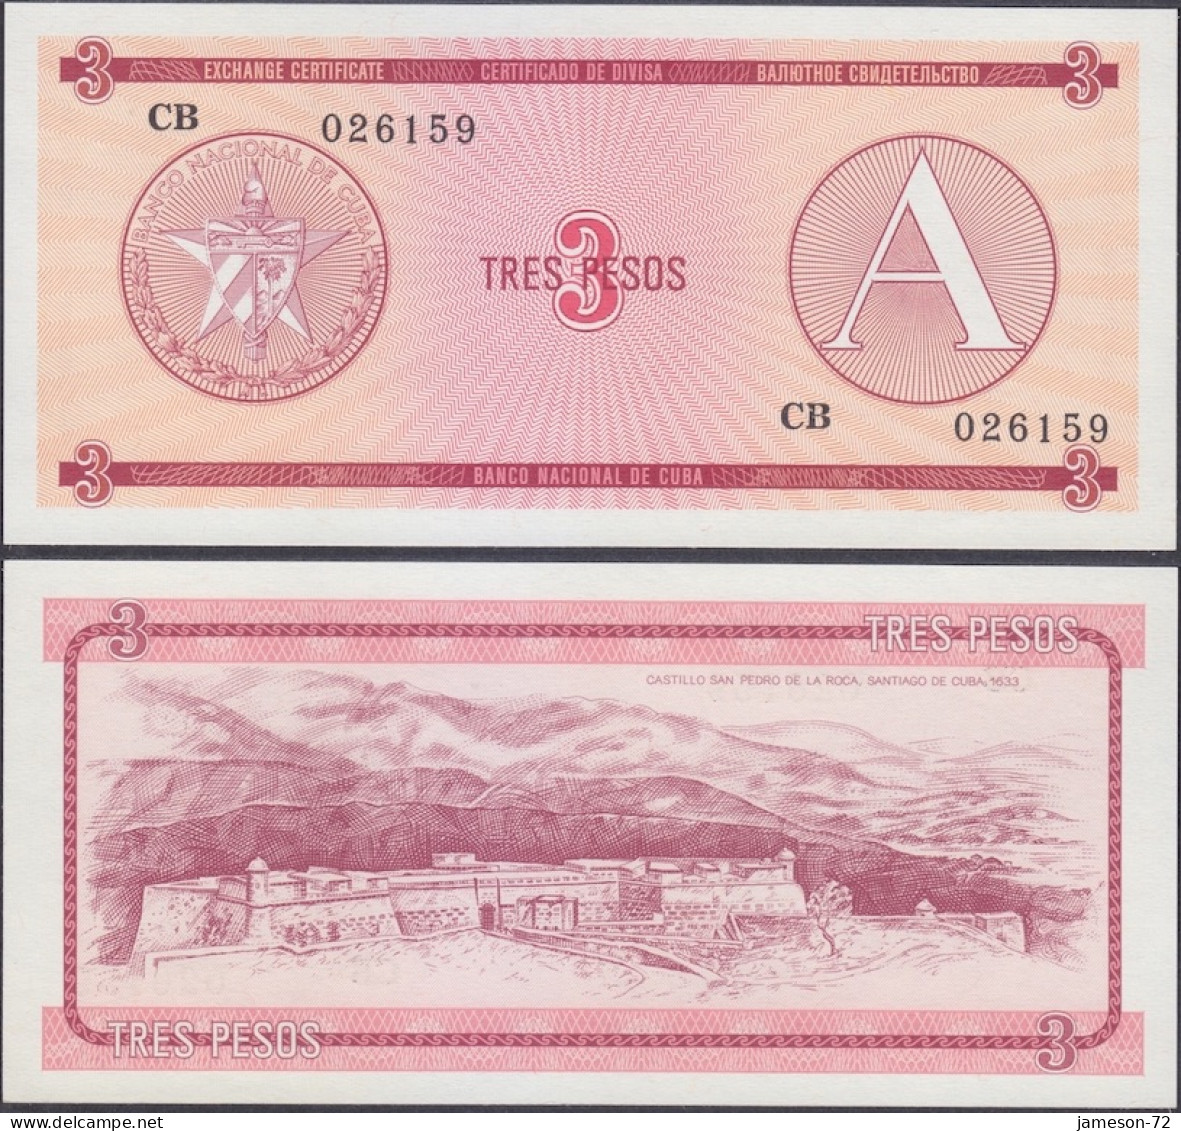 CUBA - 3 Pesos ND (1985) Serie A P# FX2 Foreign Exchange Certificate America Banknote - Edelweiss Coins - Kuba